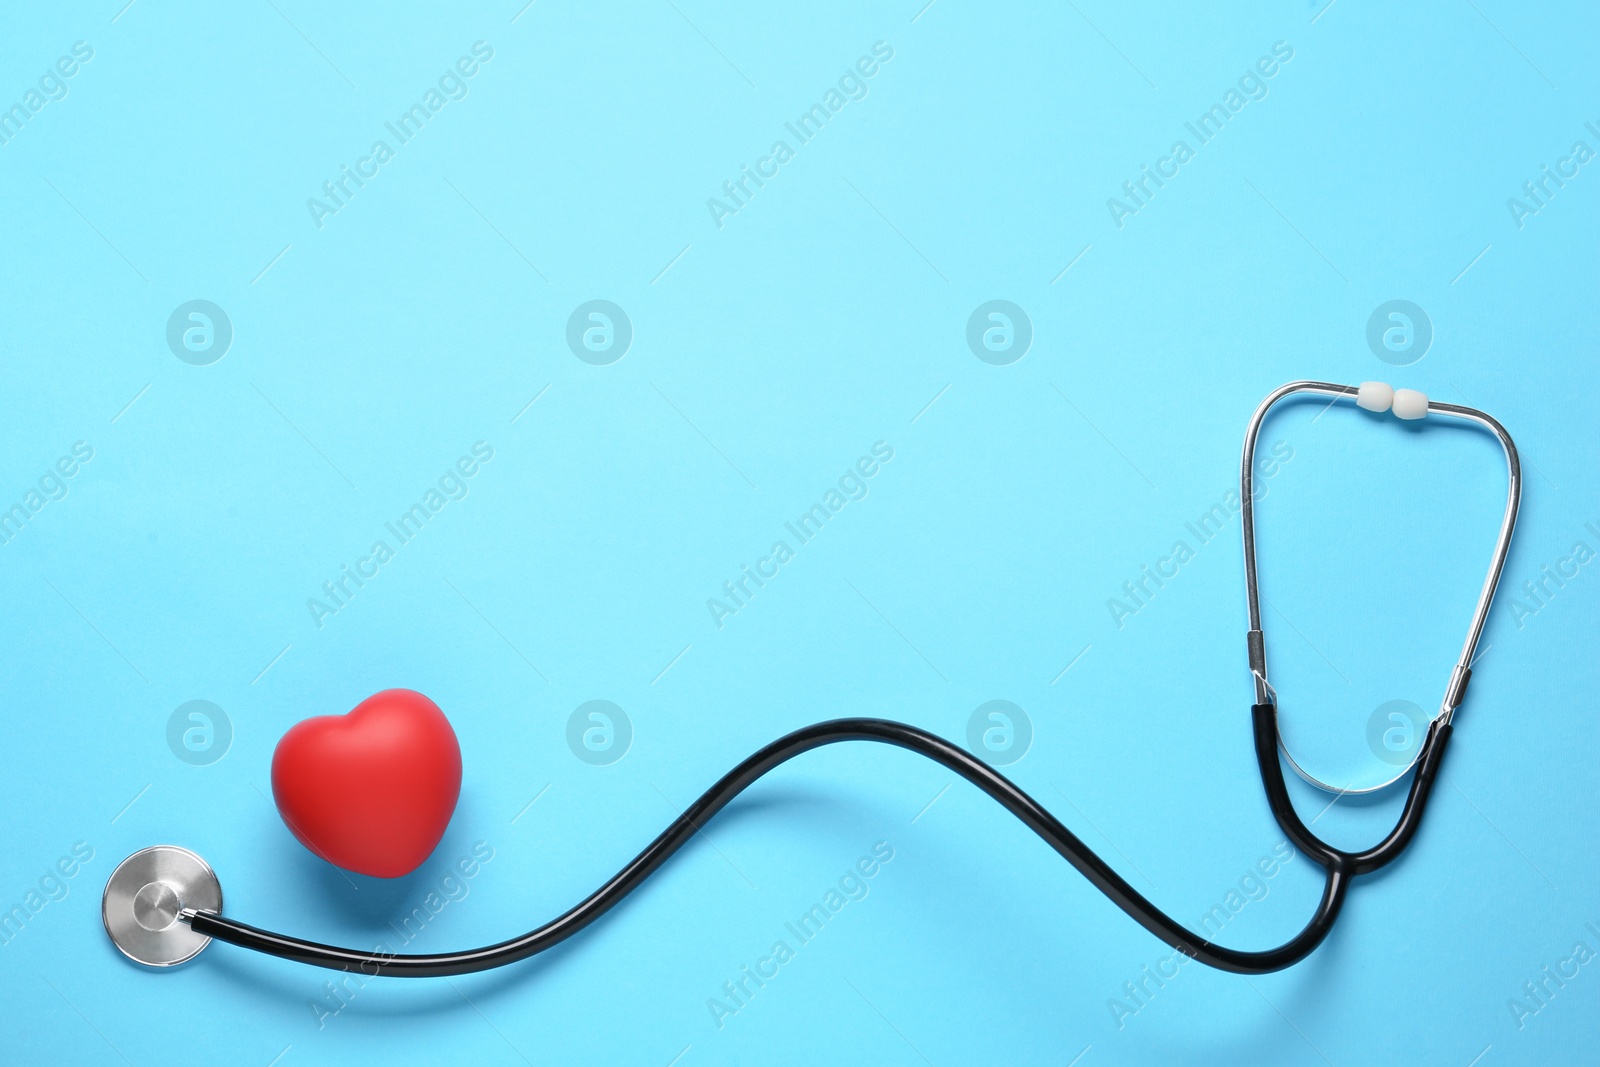 Photo of Stethoscope and red decorative heart on light blue background, flat lay with space for text. Cardiology concept